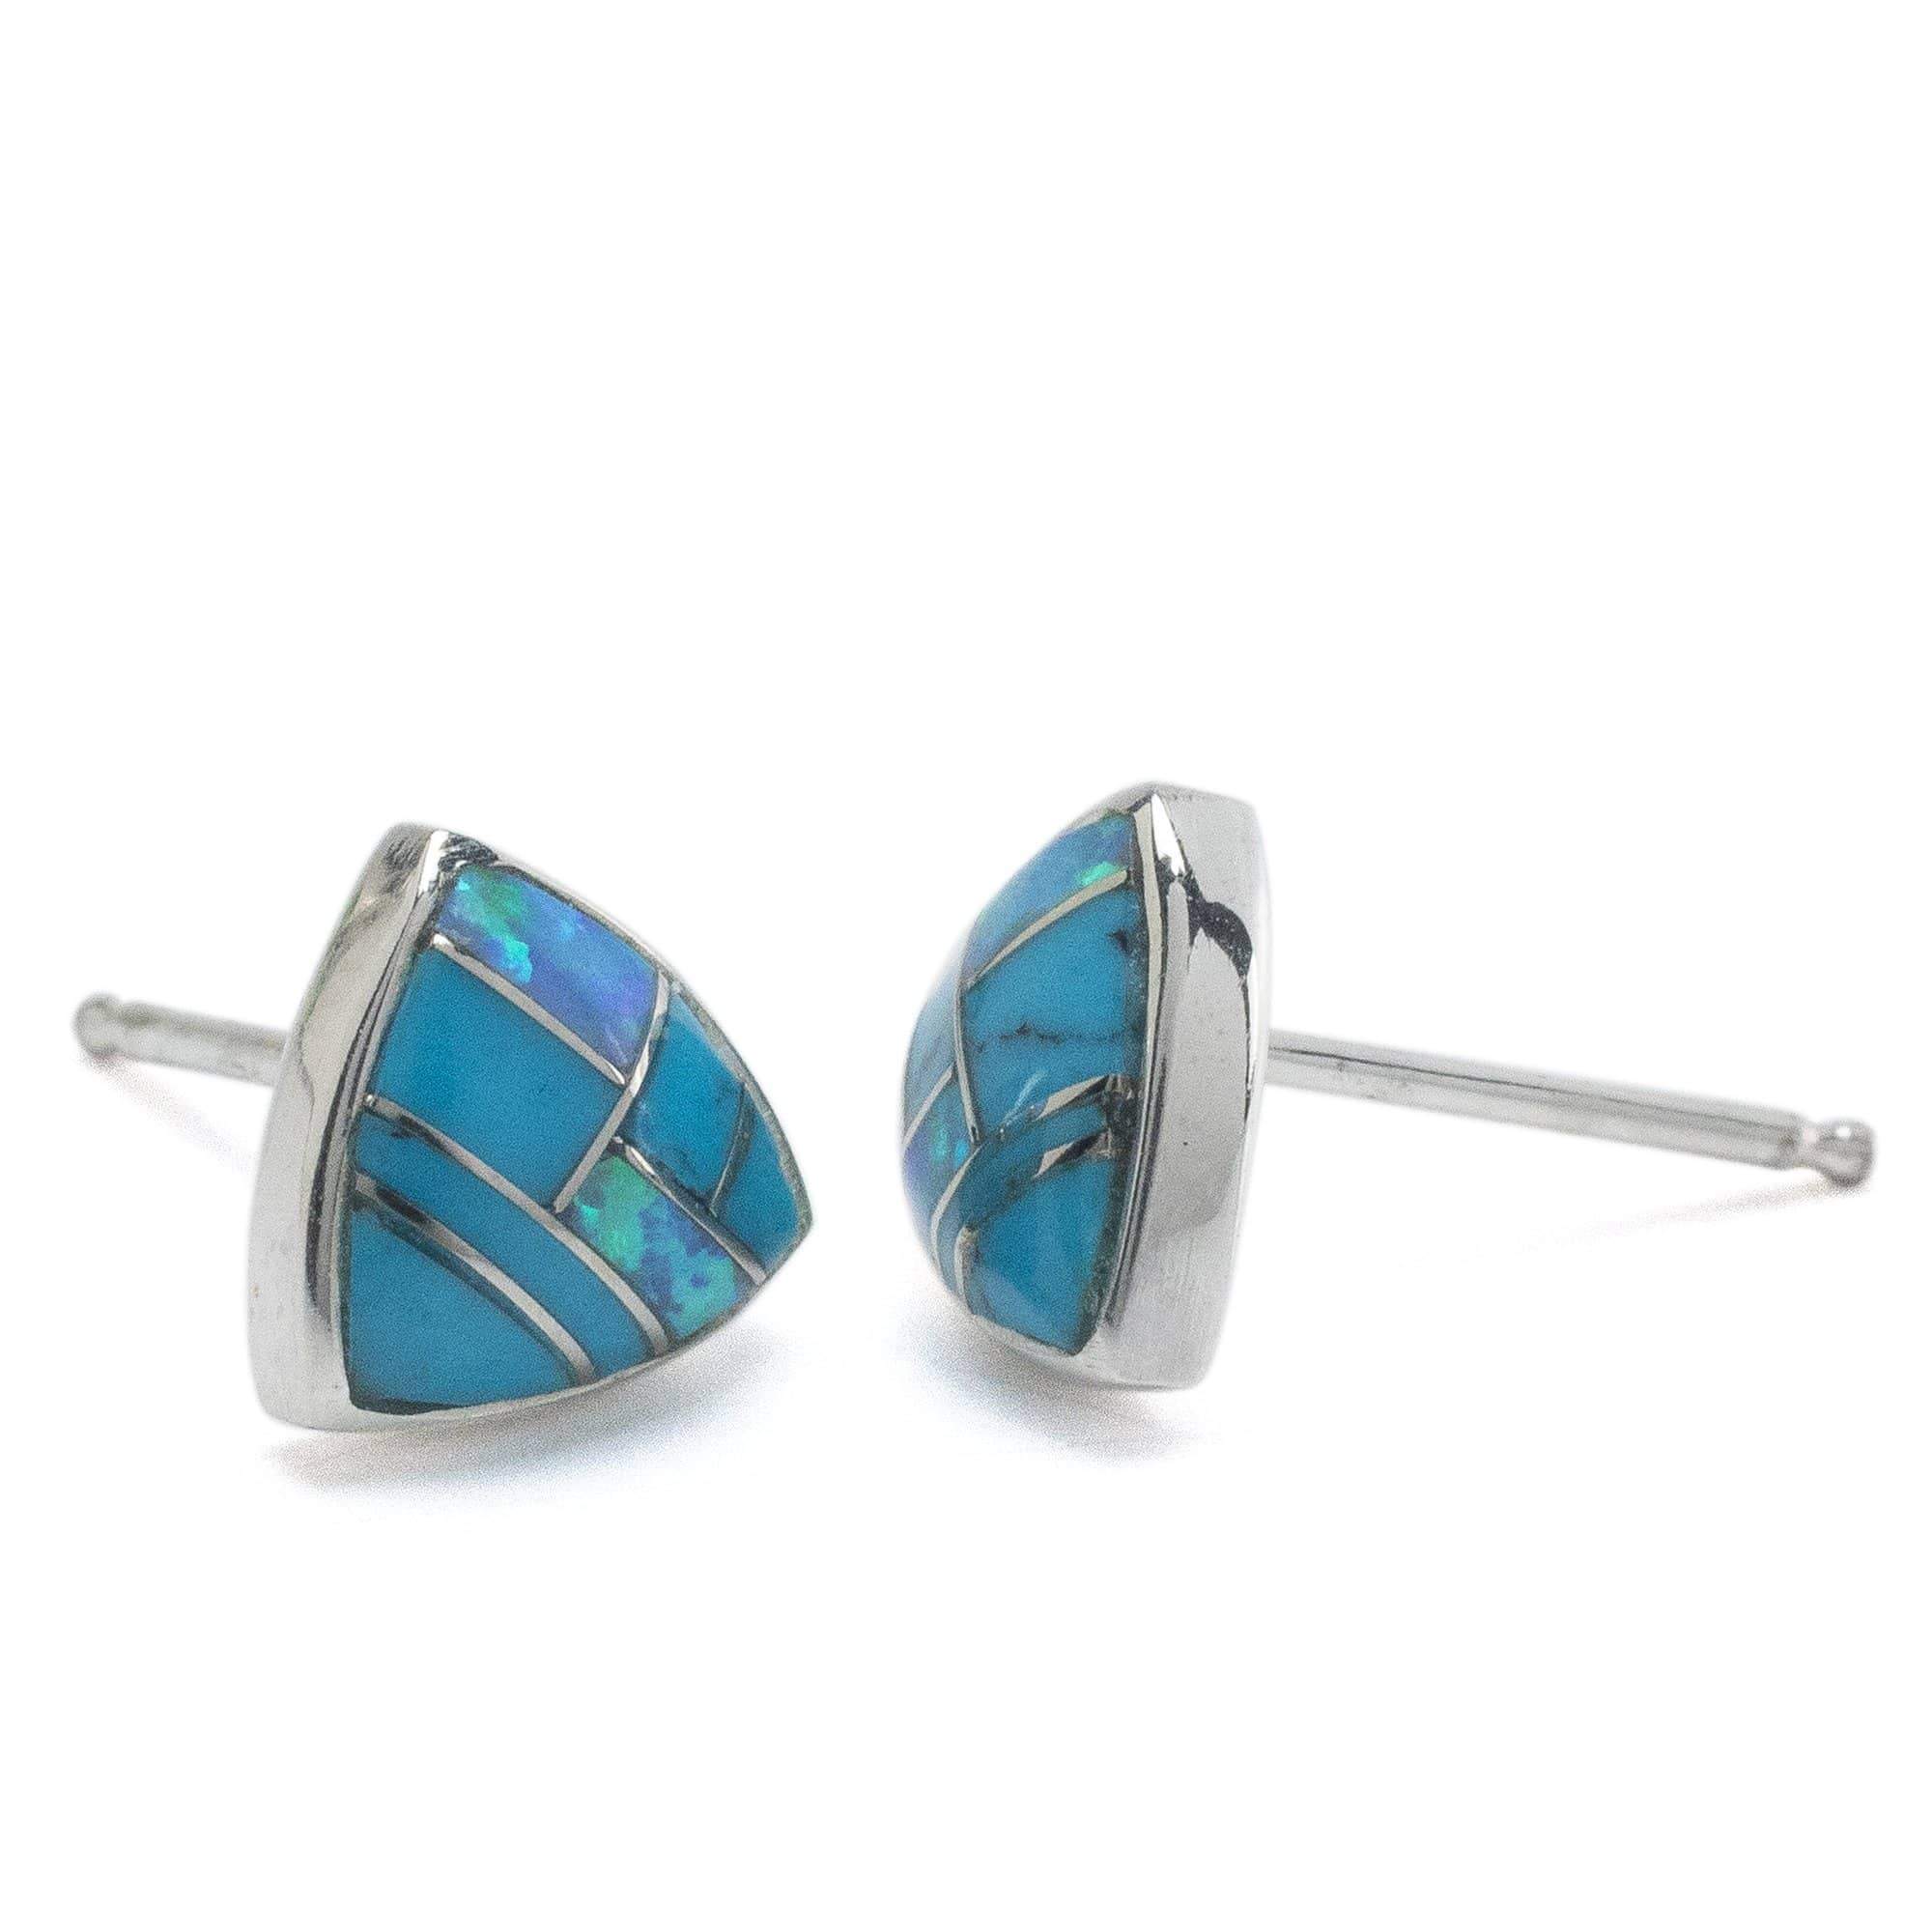 Kalifano Southwest Silver Jewelry Turquoise Triangle 925 Sterling Silver Earring with Stud Backing USA Handmade with Opal Accent NME.2242.TQ